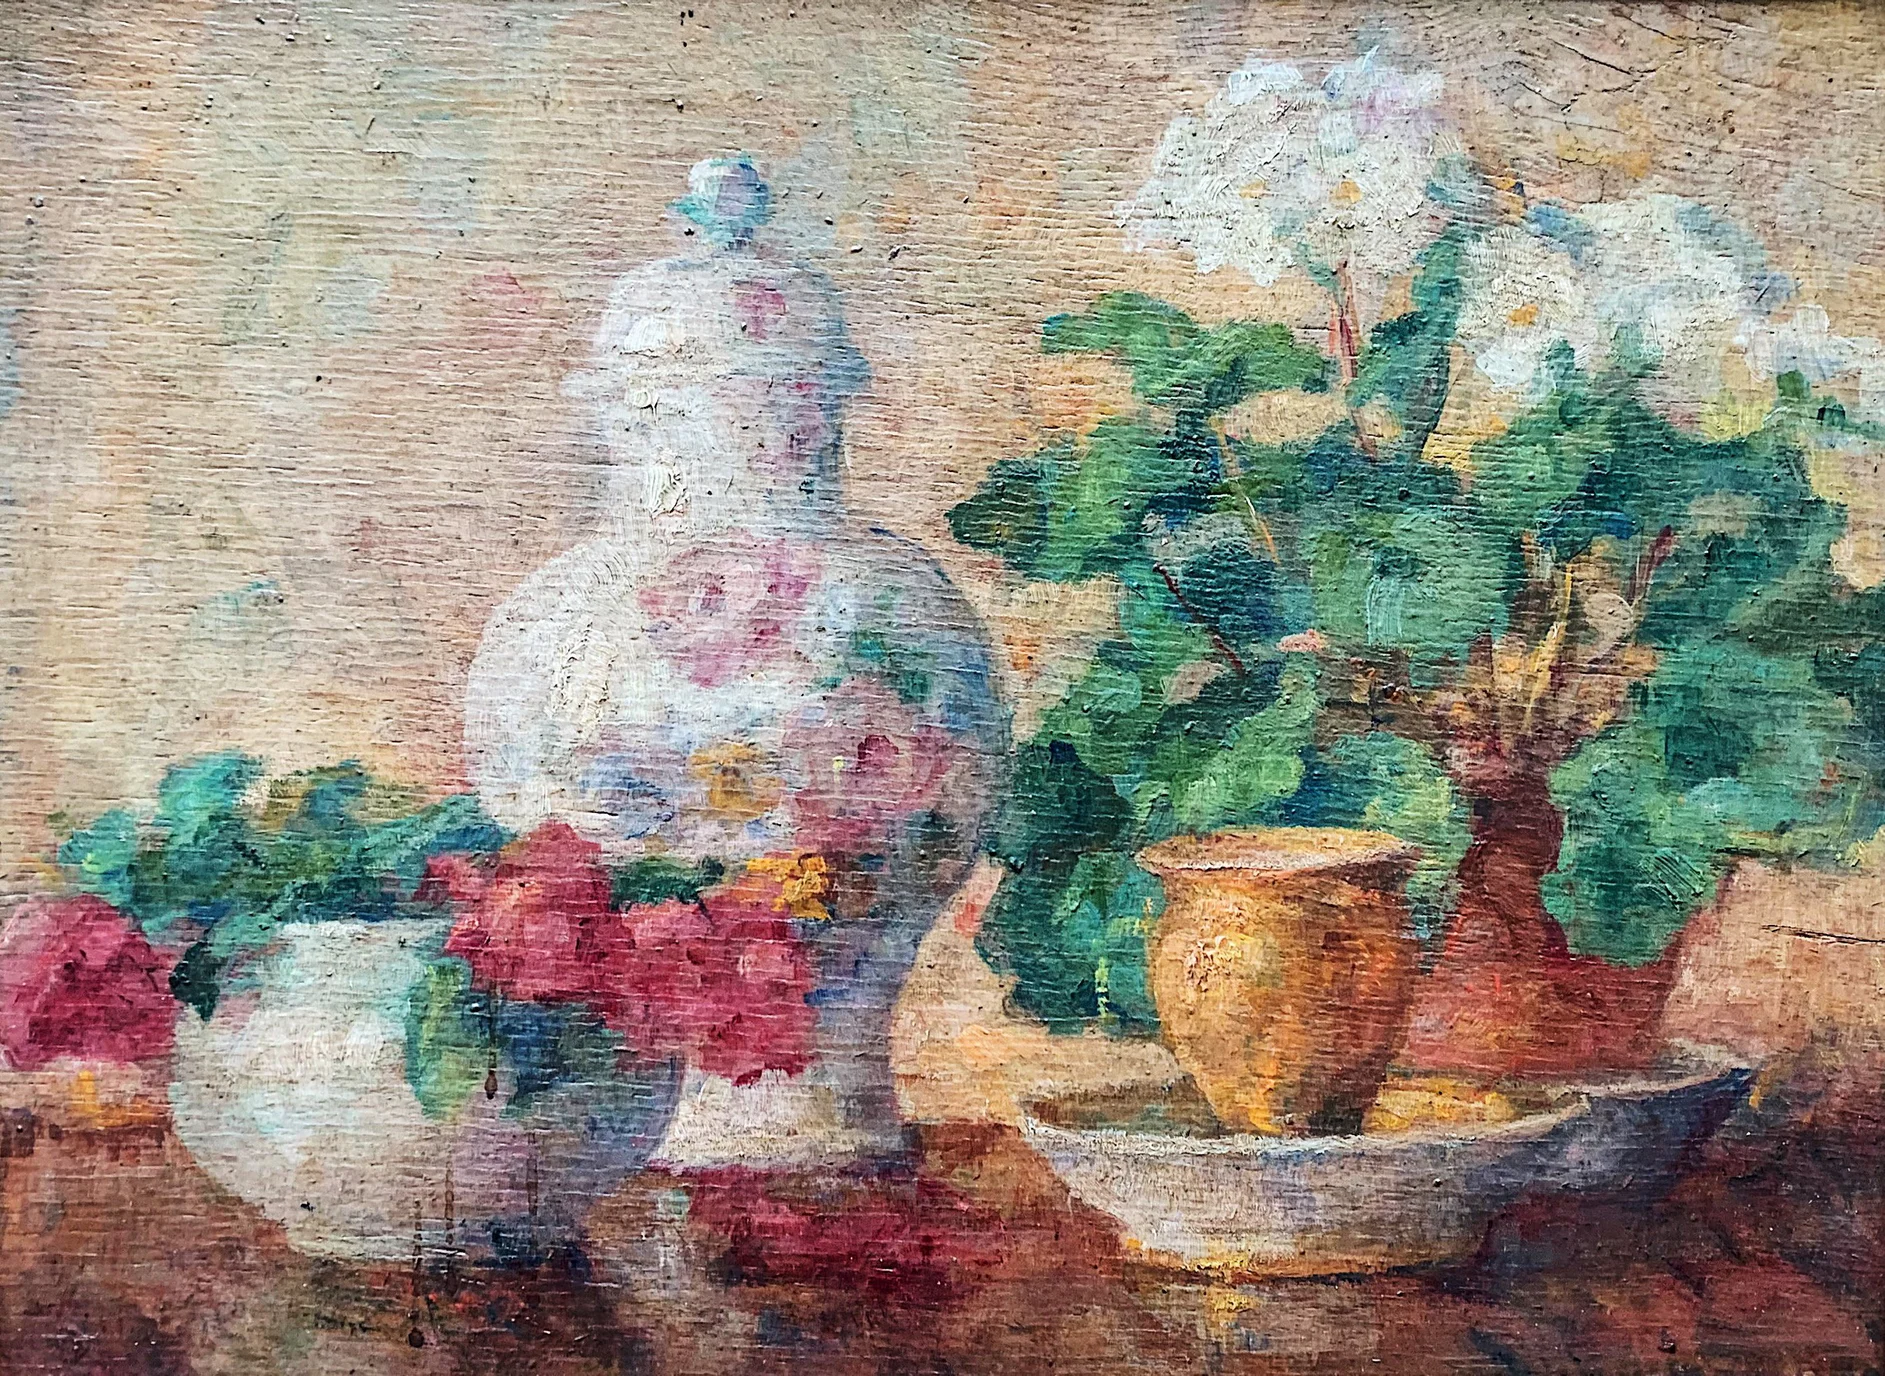 Still life with Dishes and Flowers